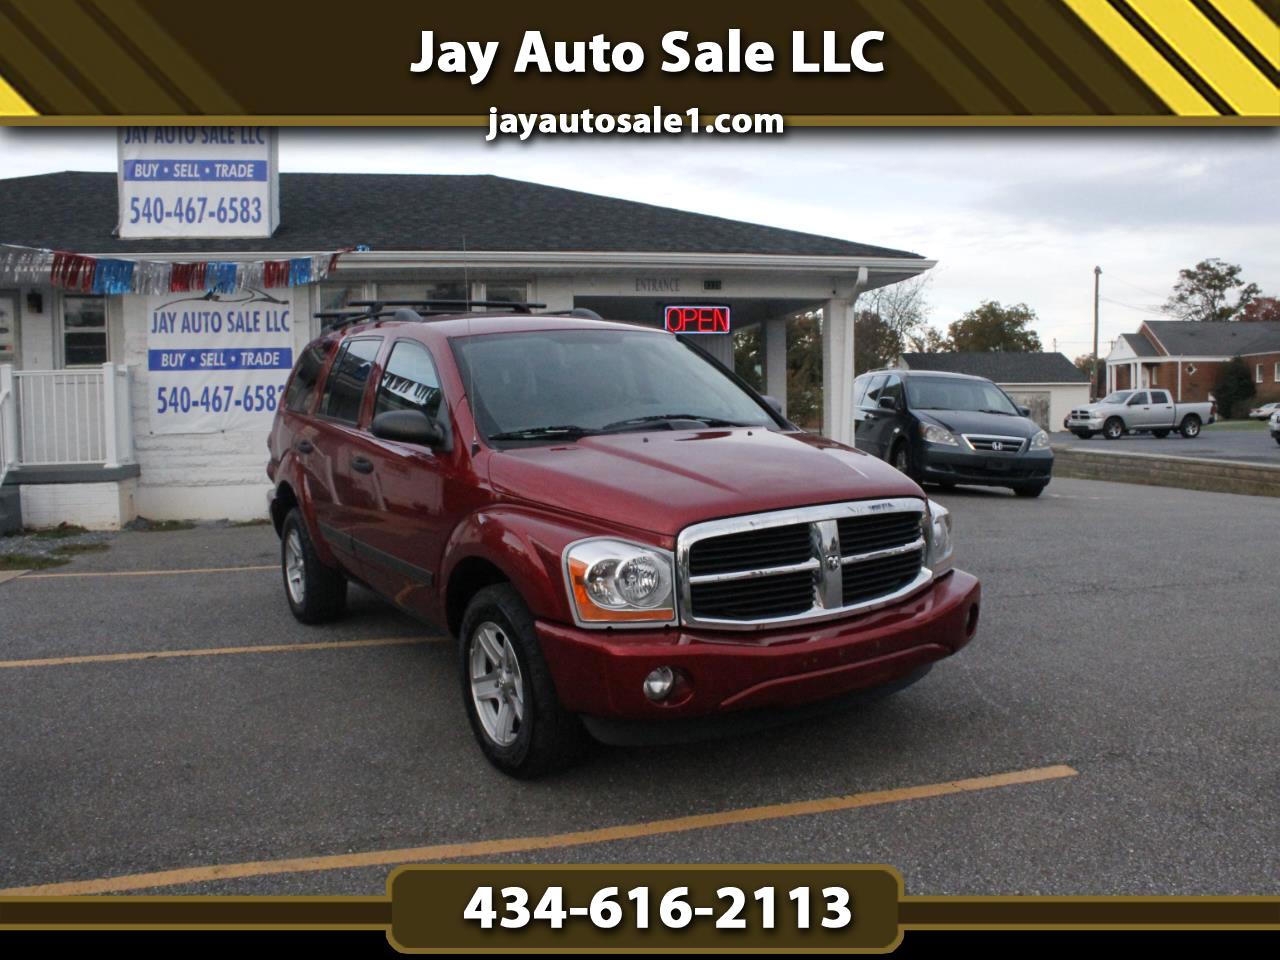 Used 2006 Dodge Durango 4dr Slt For Sale In Forest Va 24551